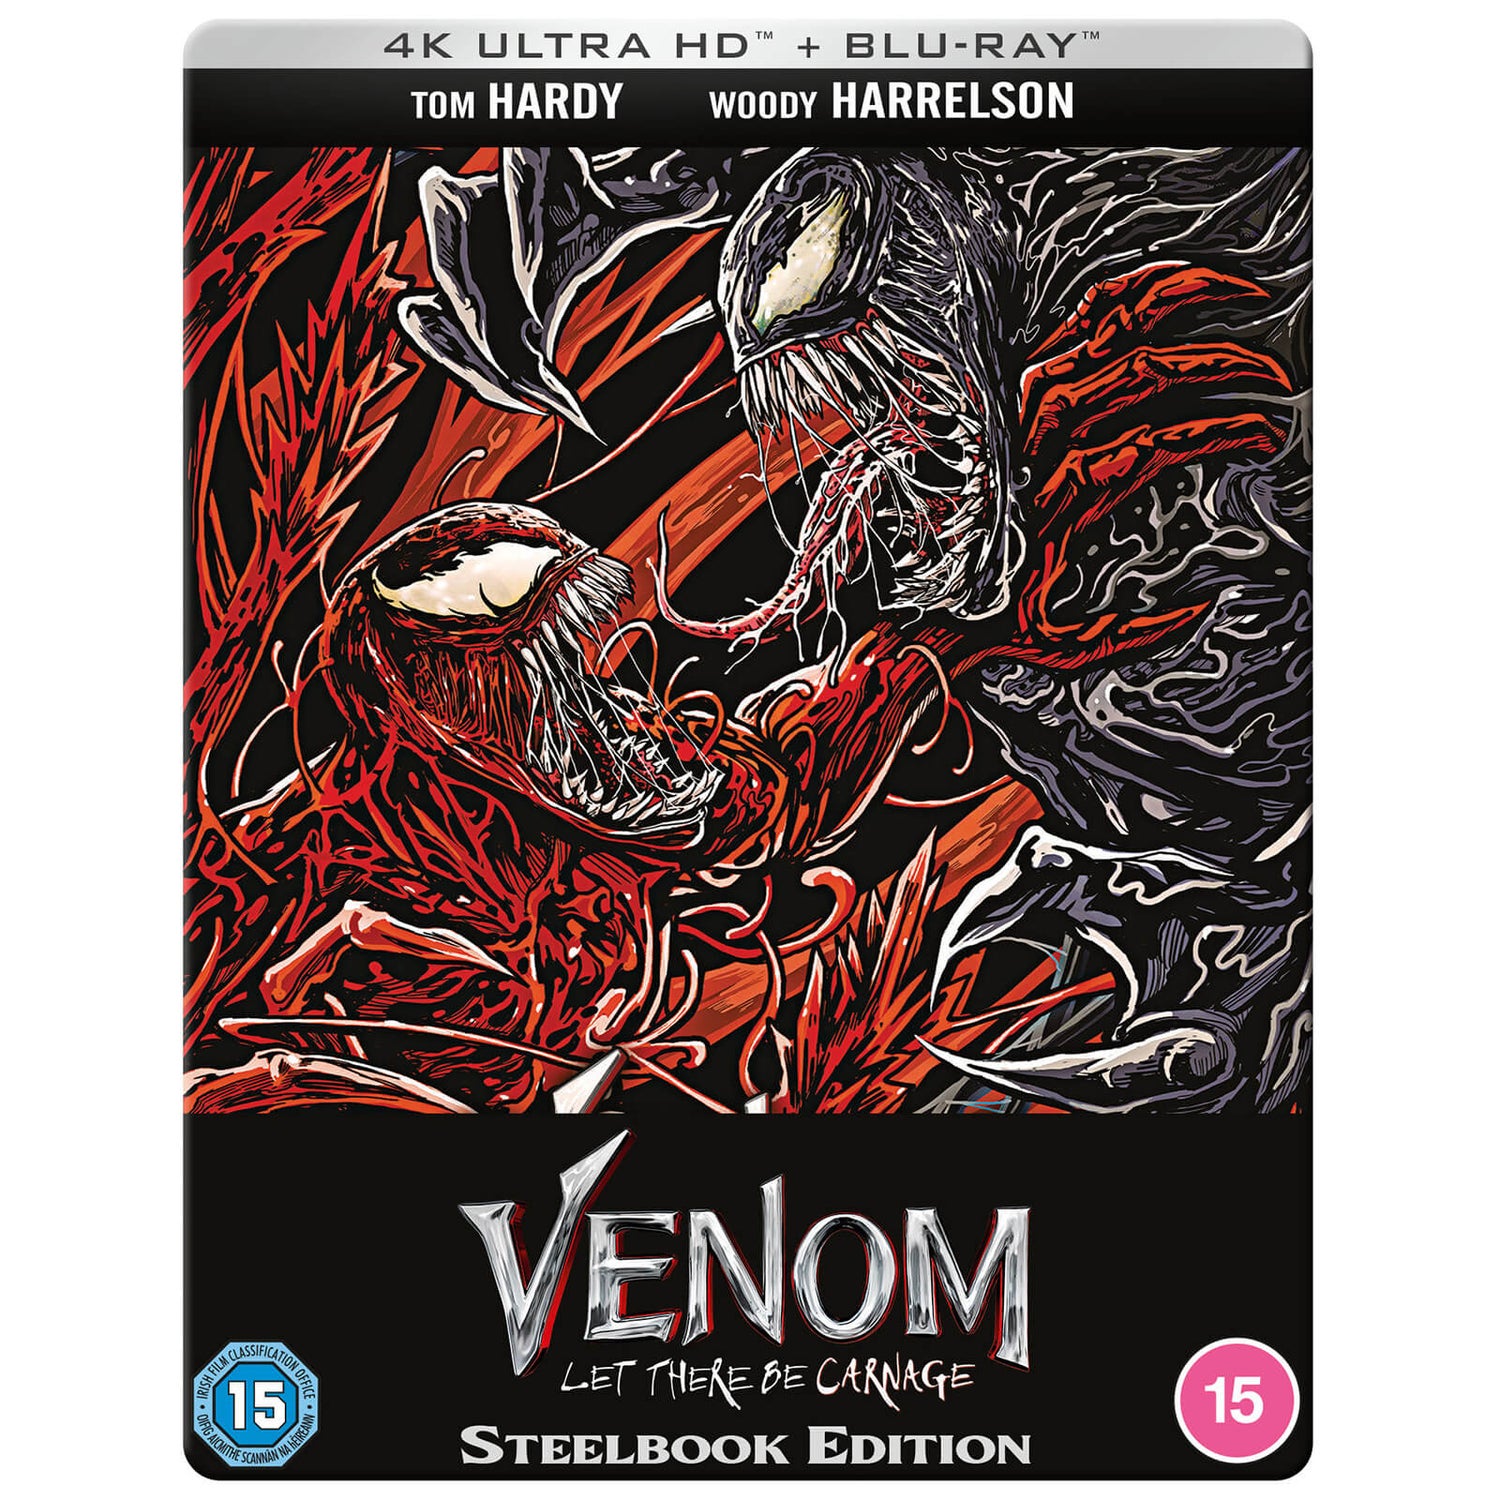 Venom: Let There Be Carnage Zavvi Exclusive 4k Ultra HD Steelbook (reprint, limited 1,000 units)